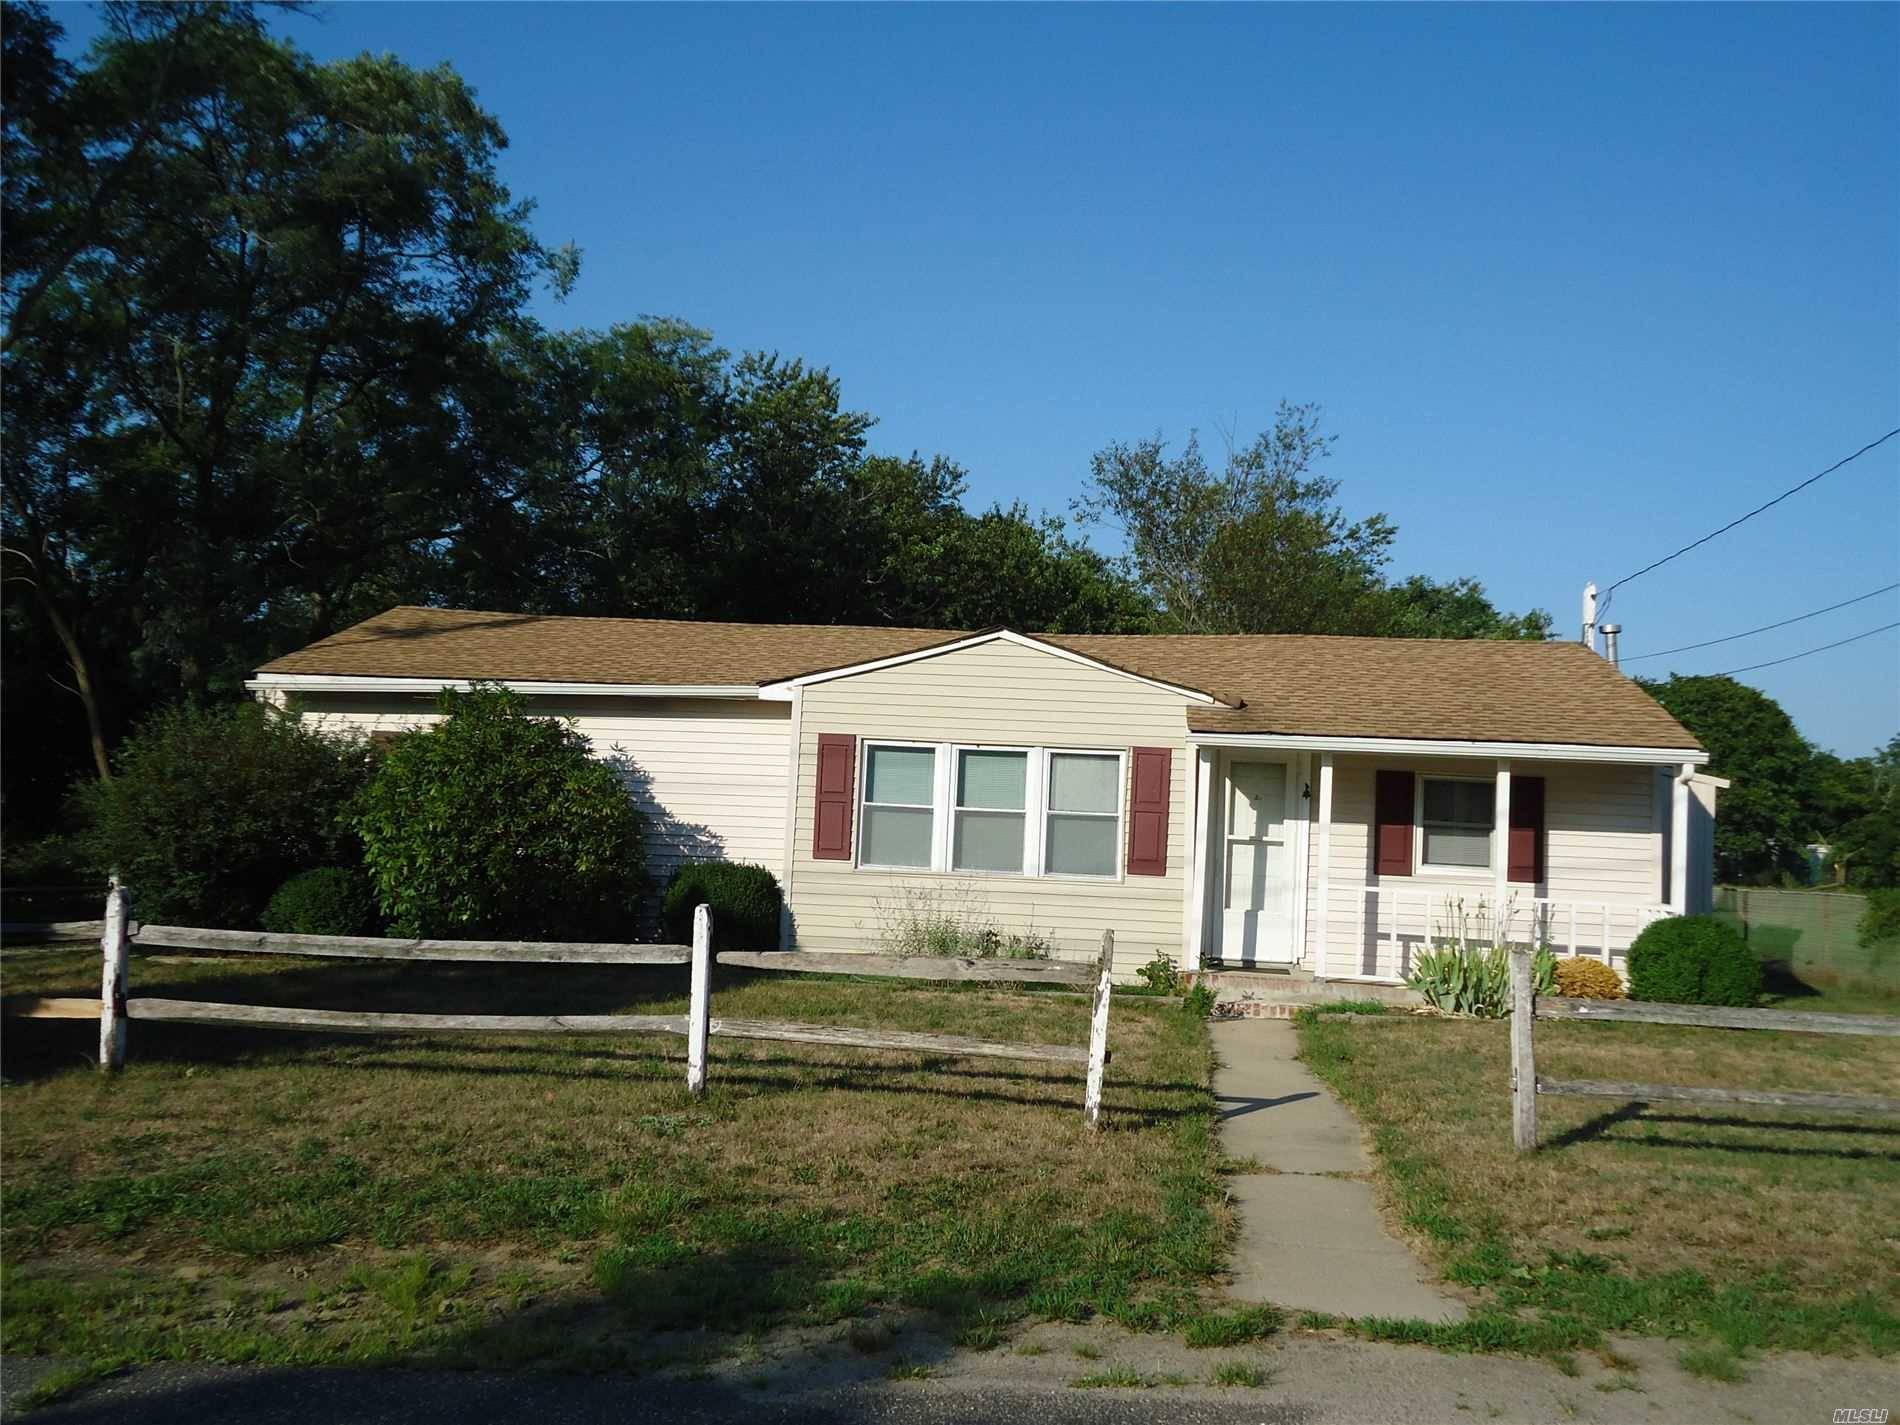 clean three bedroom ranch with a large yard and steps away to schools and down town shopping, restaurants and theaters low property taxes shed on the property is a gift ...